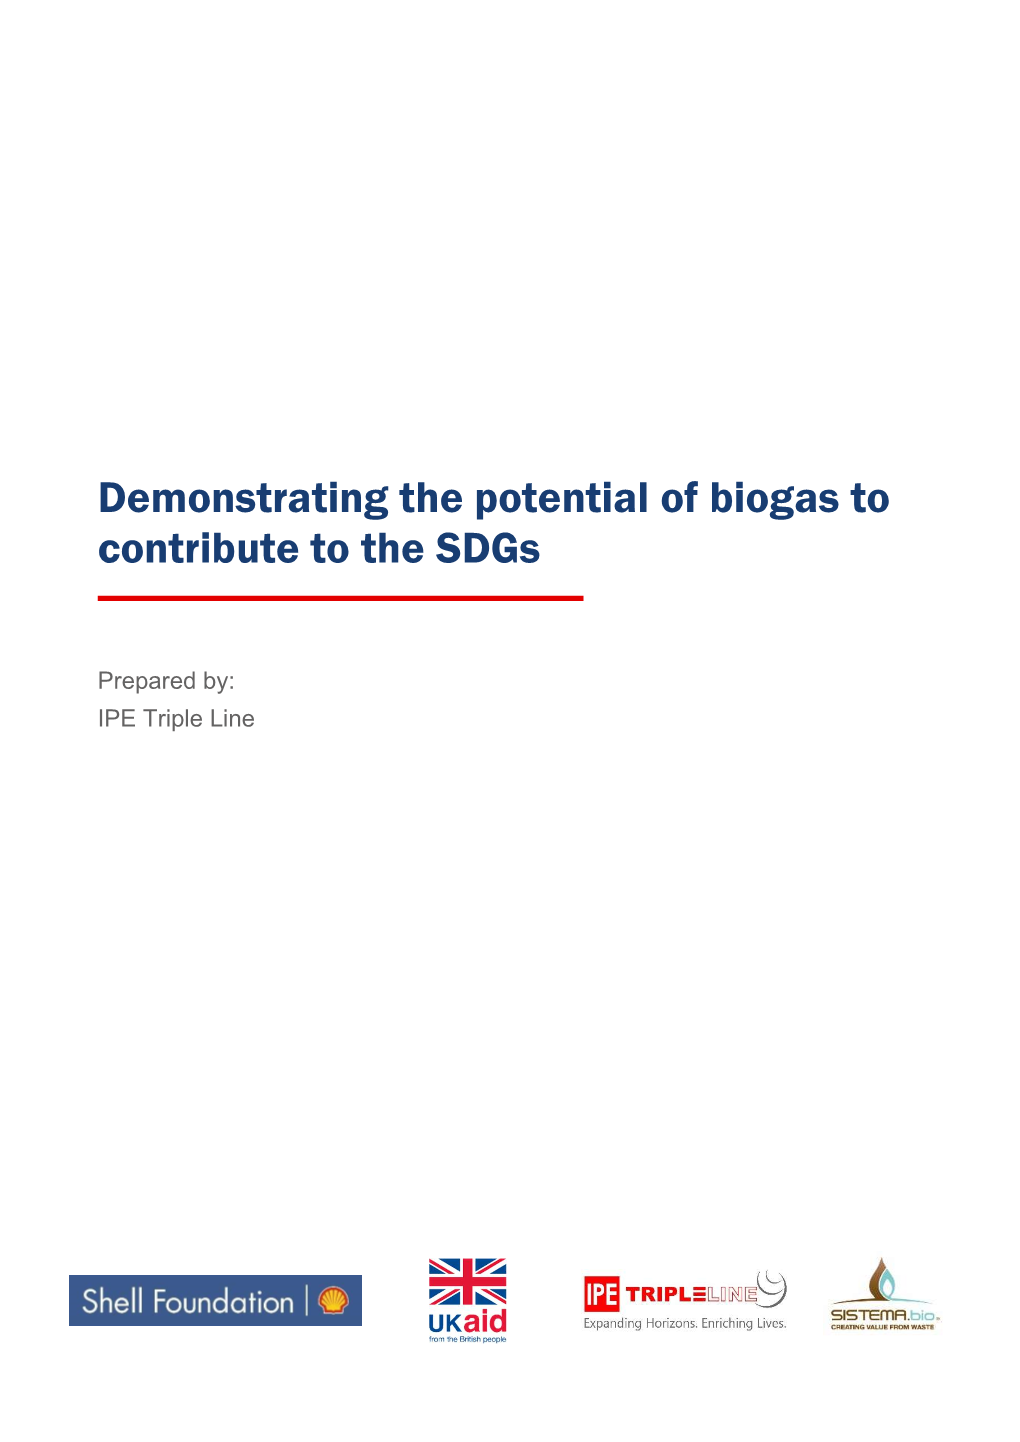 Demonstrating the Potential of Biogas to Contribute to the Sdgs